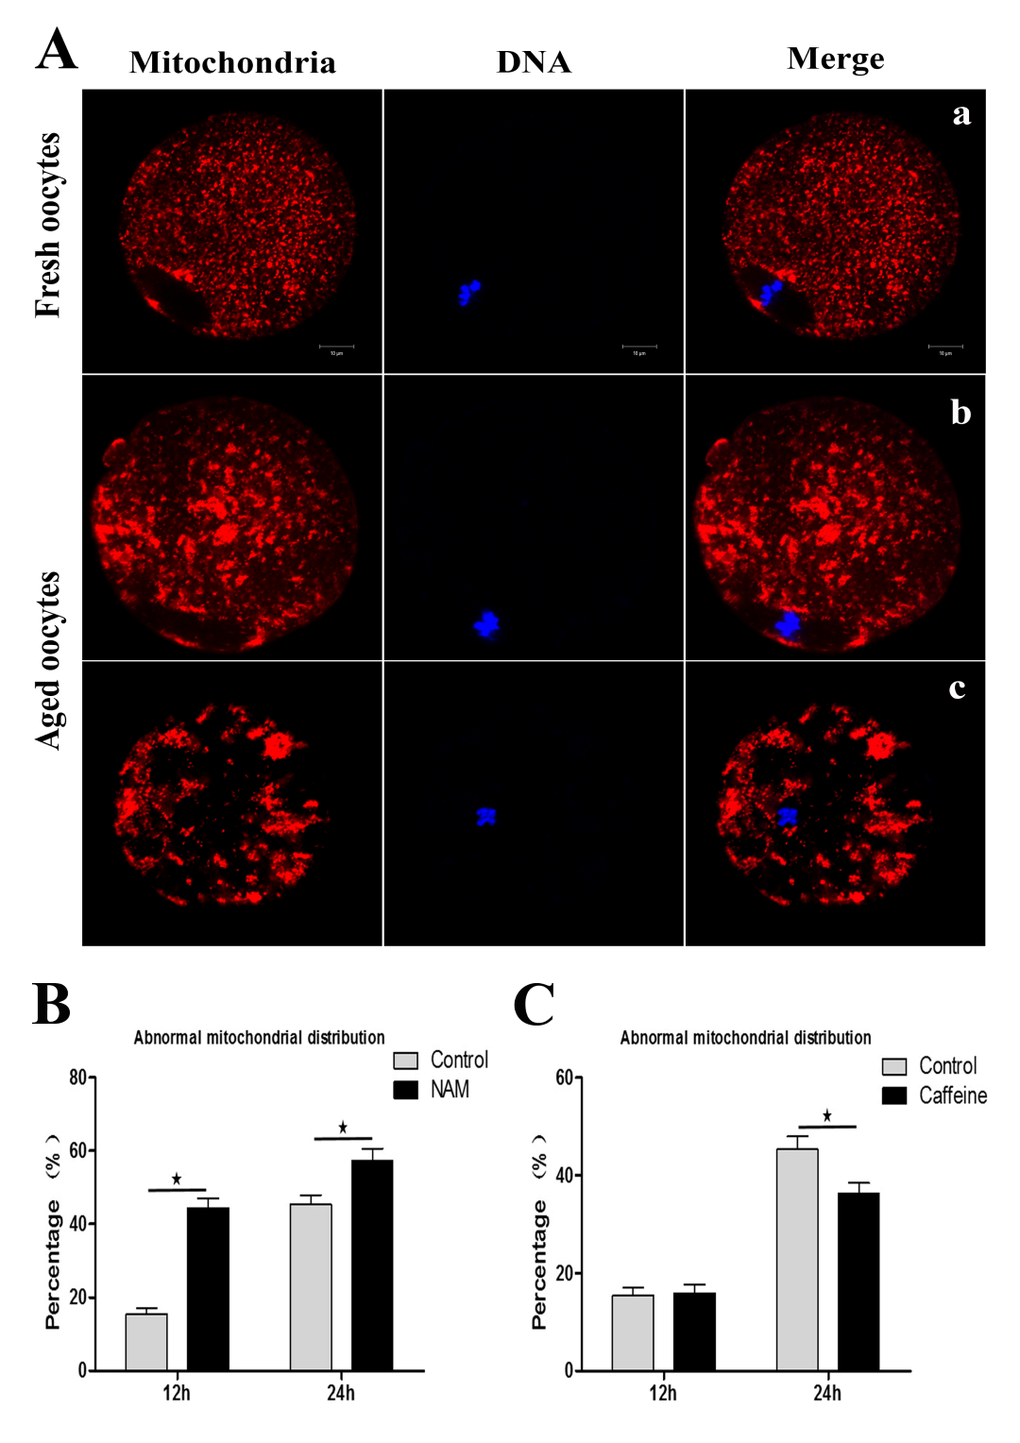 SIRT1, 2, 3 affect mitochondrial distribution during aging of MII oocytes